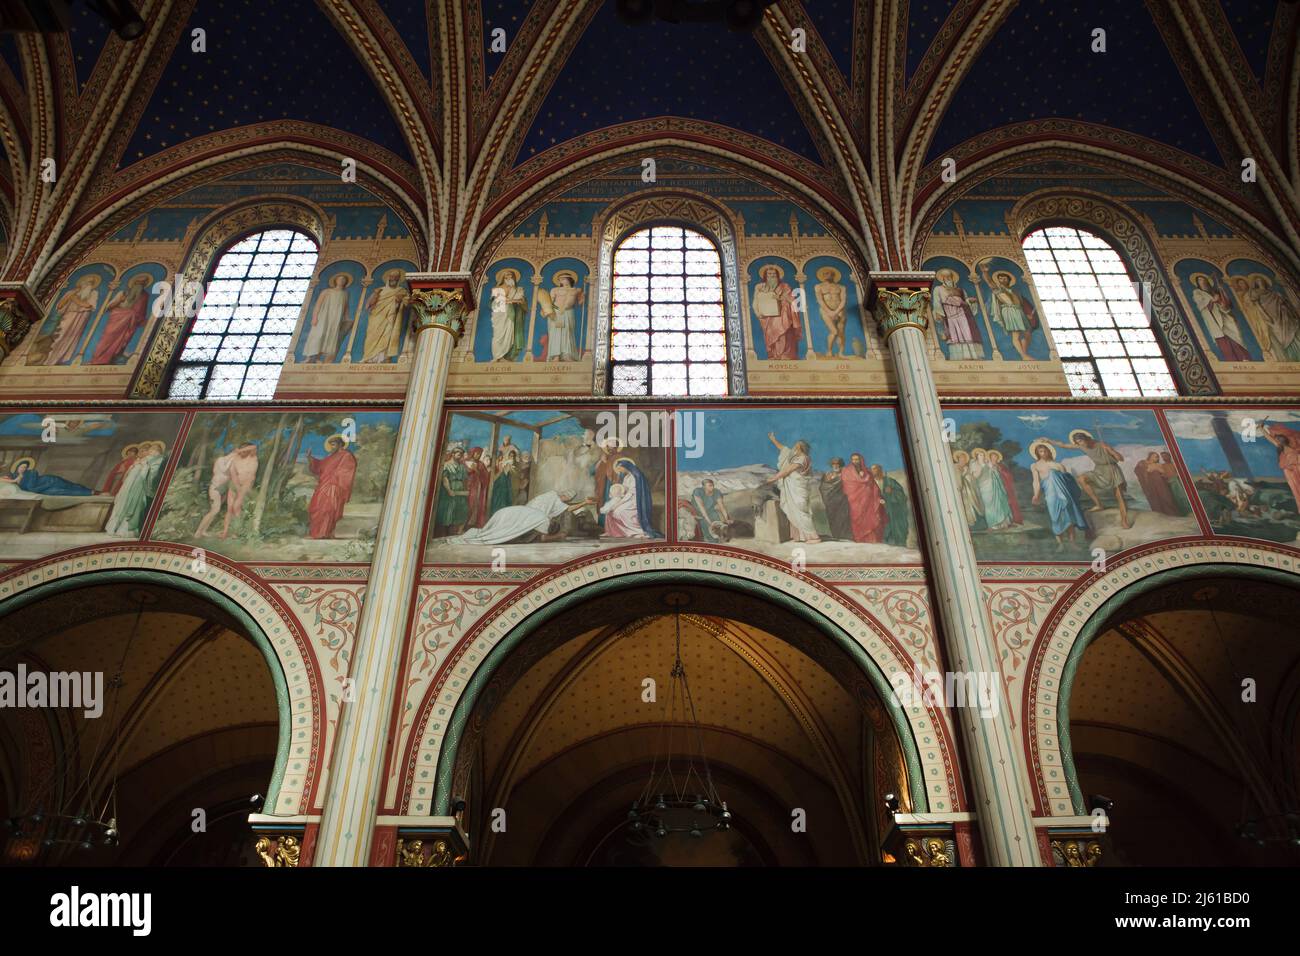 Mural paintings by French painter Jean-Hippolyte Flandrin (1856-1863) in the main nave of the Church of Saint-Germain-des-Prés in Paris, France. Stock Photo